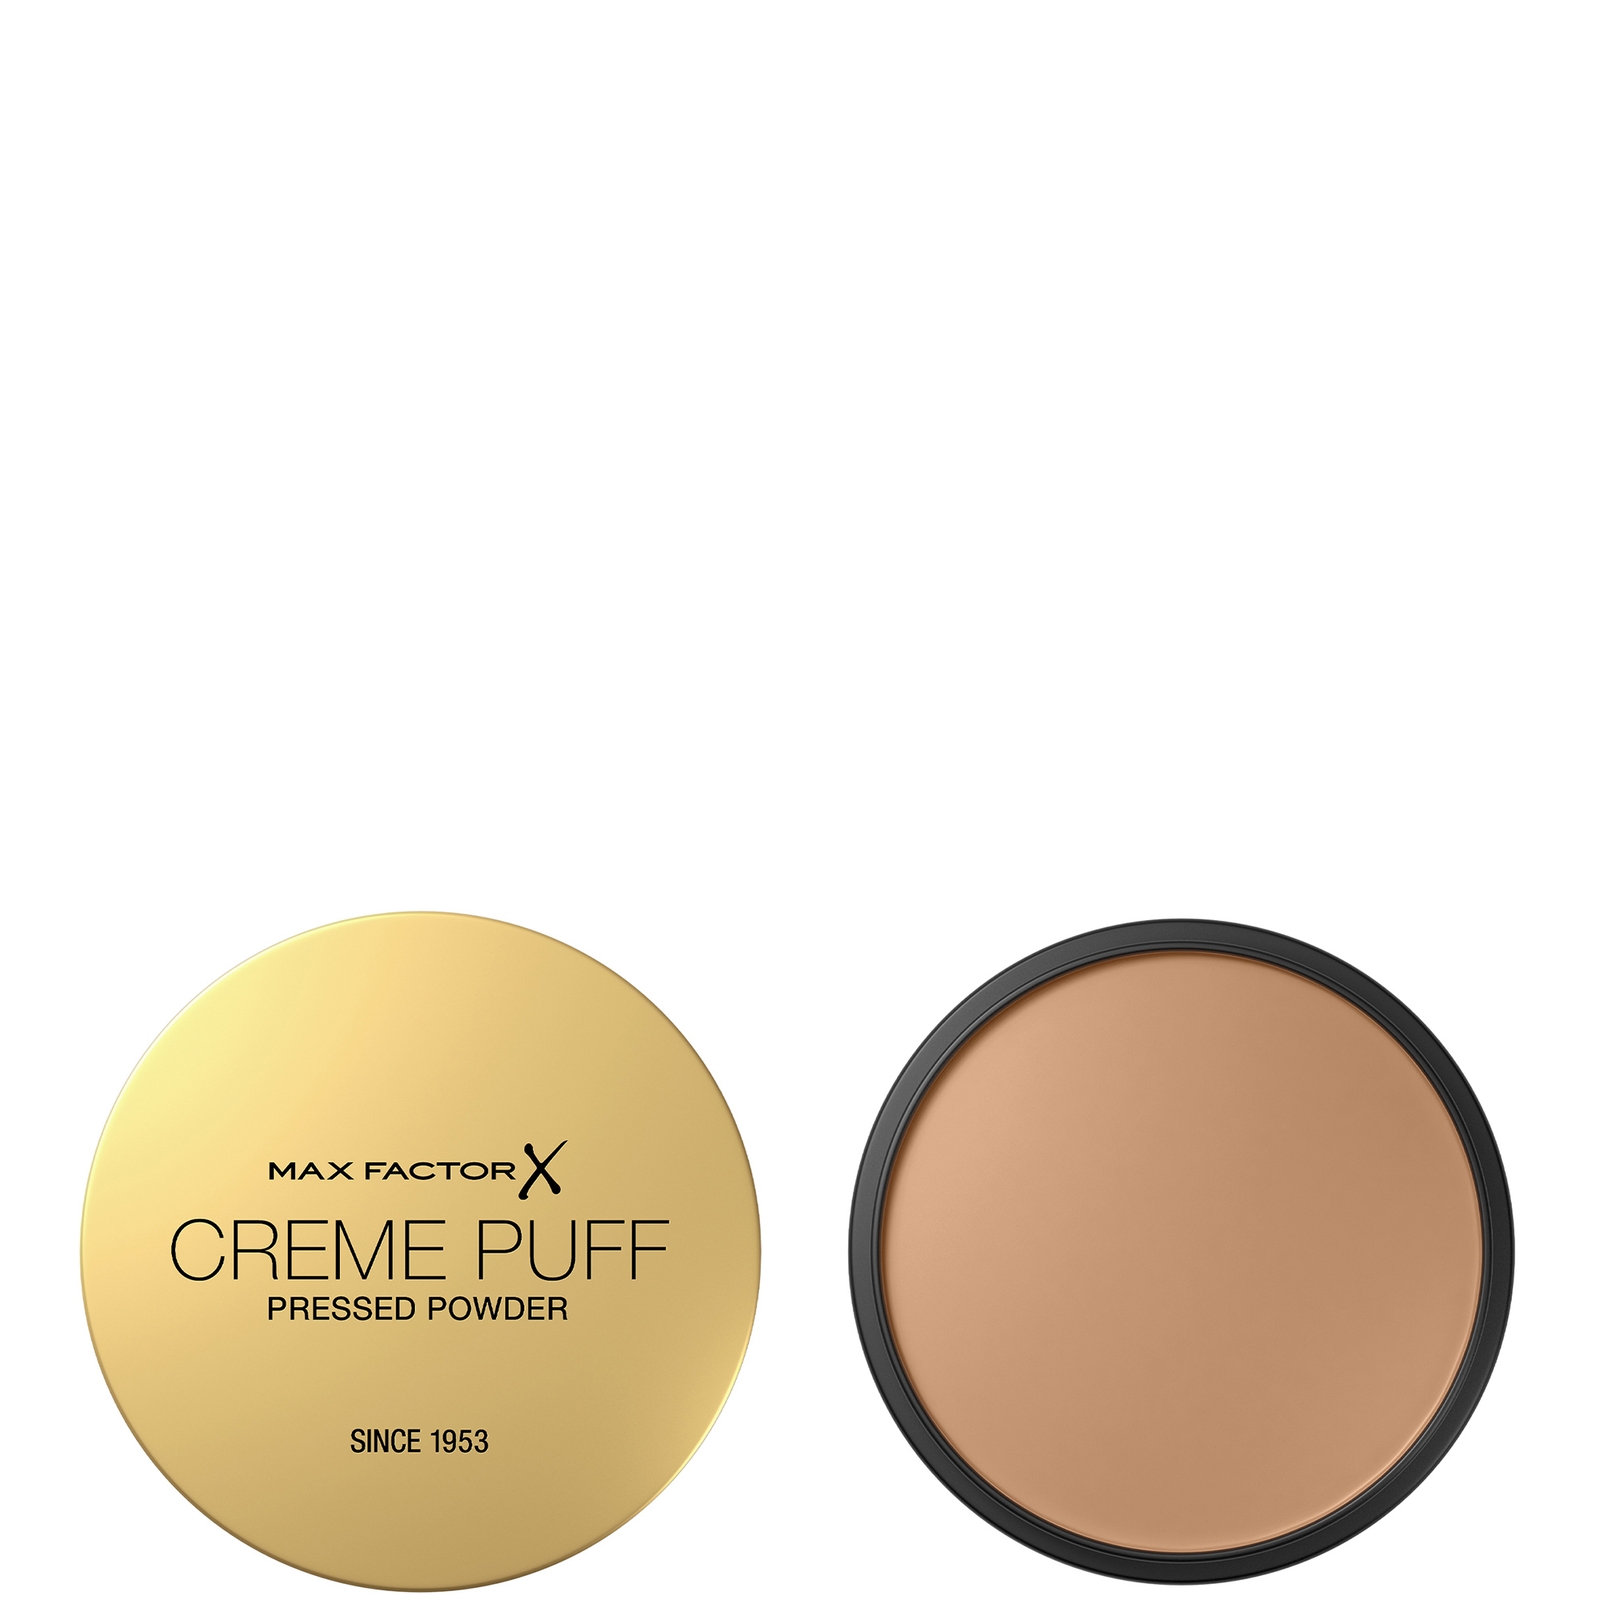 Image of Max Factor Creme Puff Pressed Powder 21g (Various Shades) - Nouveau Beige